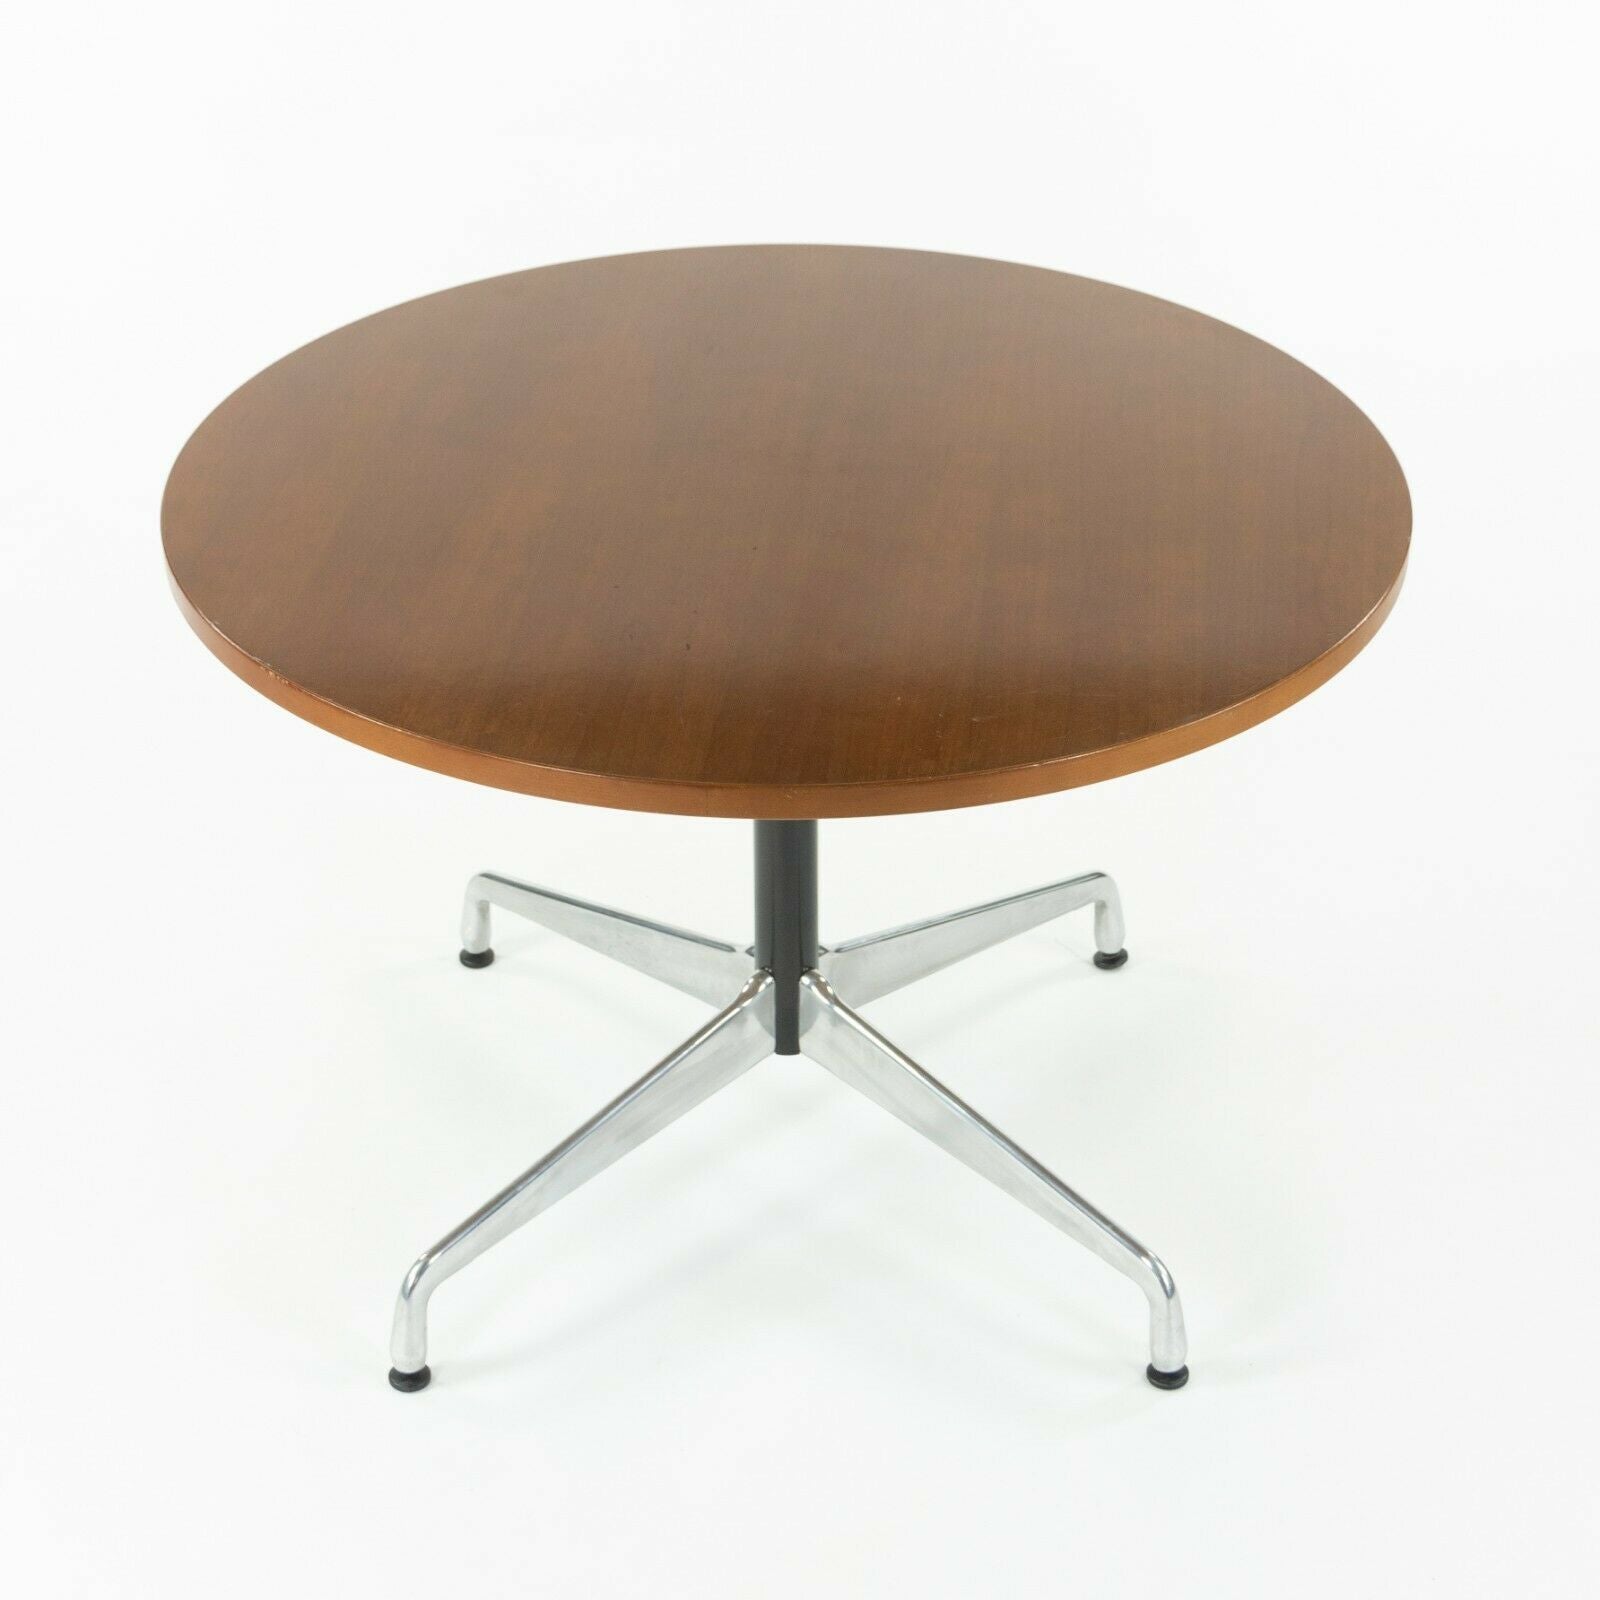 SOLD 2012 Herman Miller Eames Aluminum Group Segmented Dining Table 42 Inch Walnut